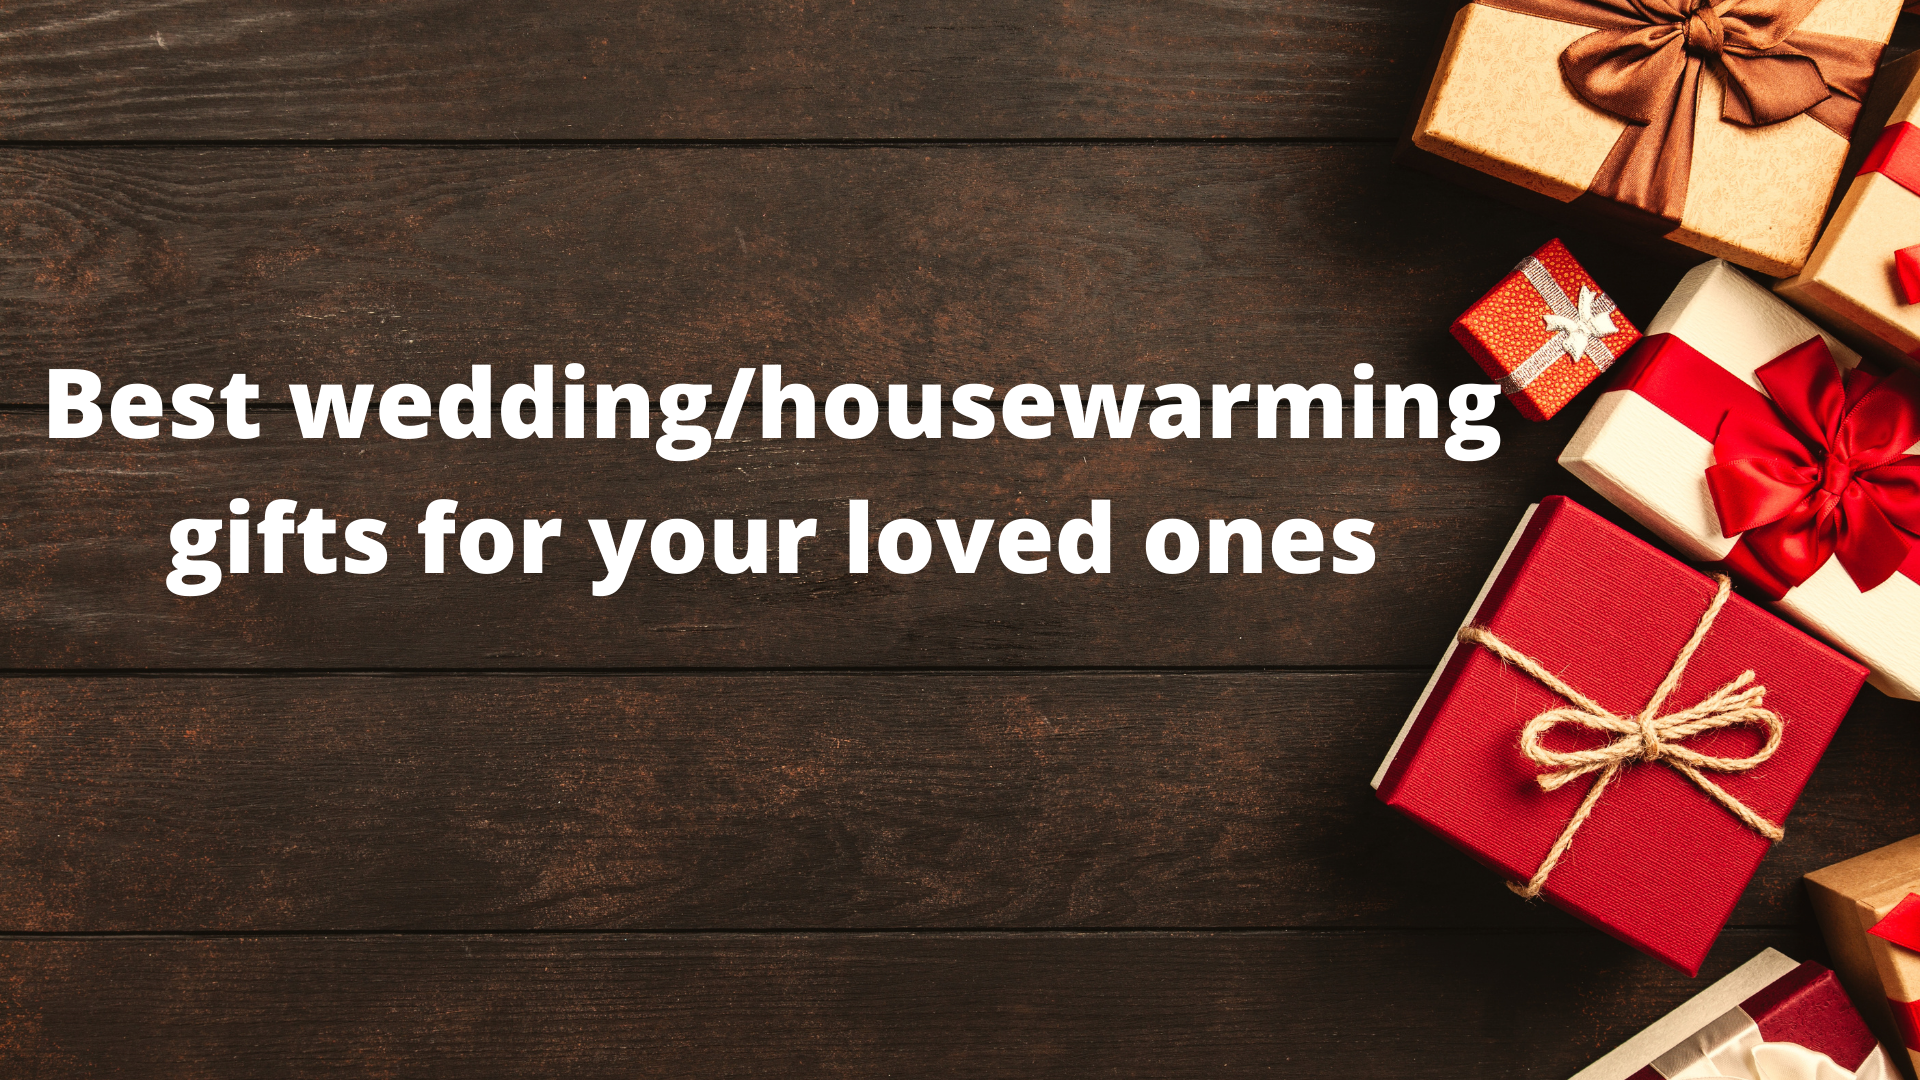 Best wedding/housewarming gifts for your loved ones